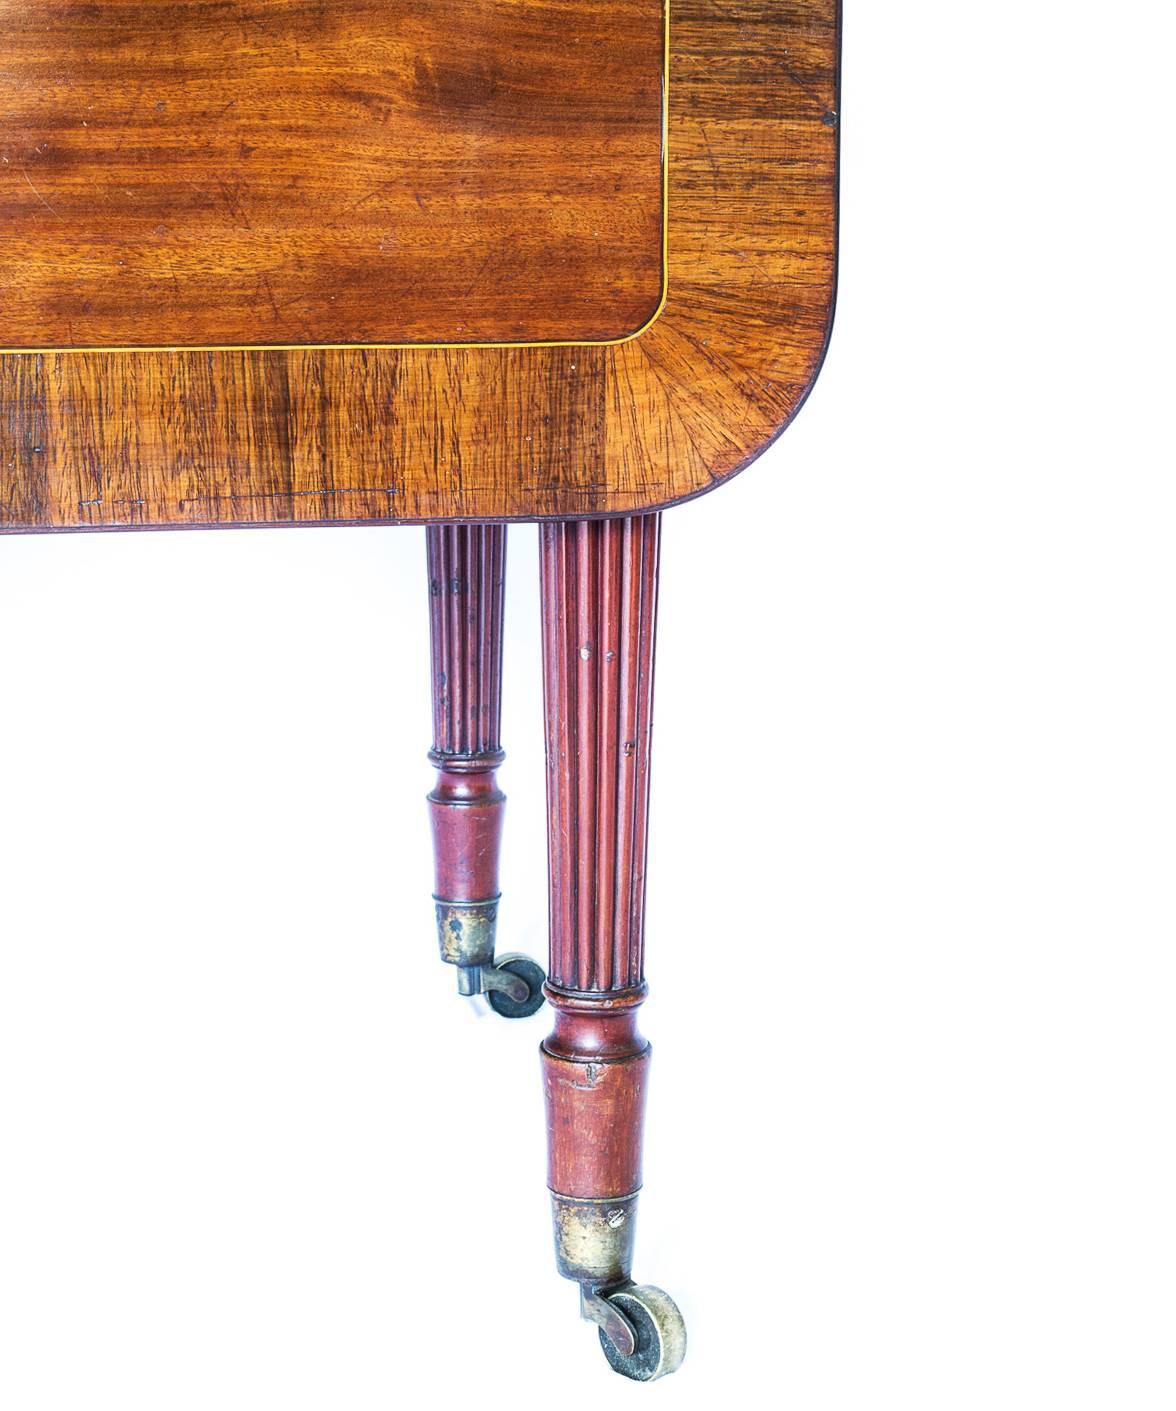 A very fine Regency period mahogany pembroke table of the Gillows of Lancaster signature style,

English, circa 1815-1820.

The beautifully grained and gently patinated mahogany veneered top, crossbanded and line-inlaid, with reeded edge and